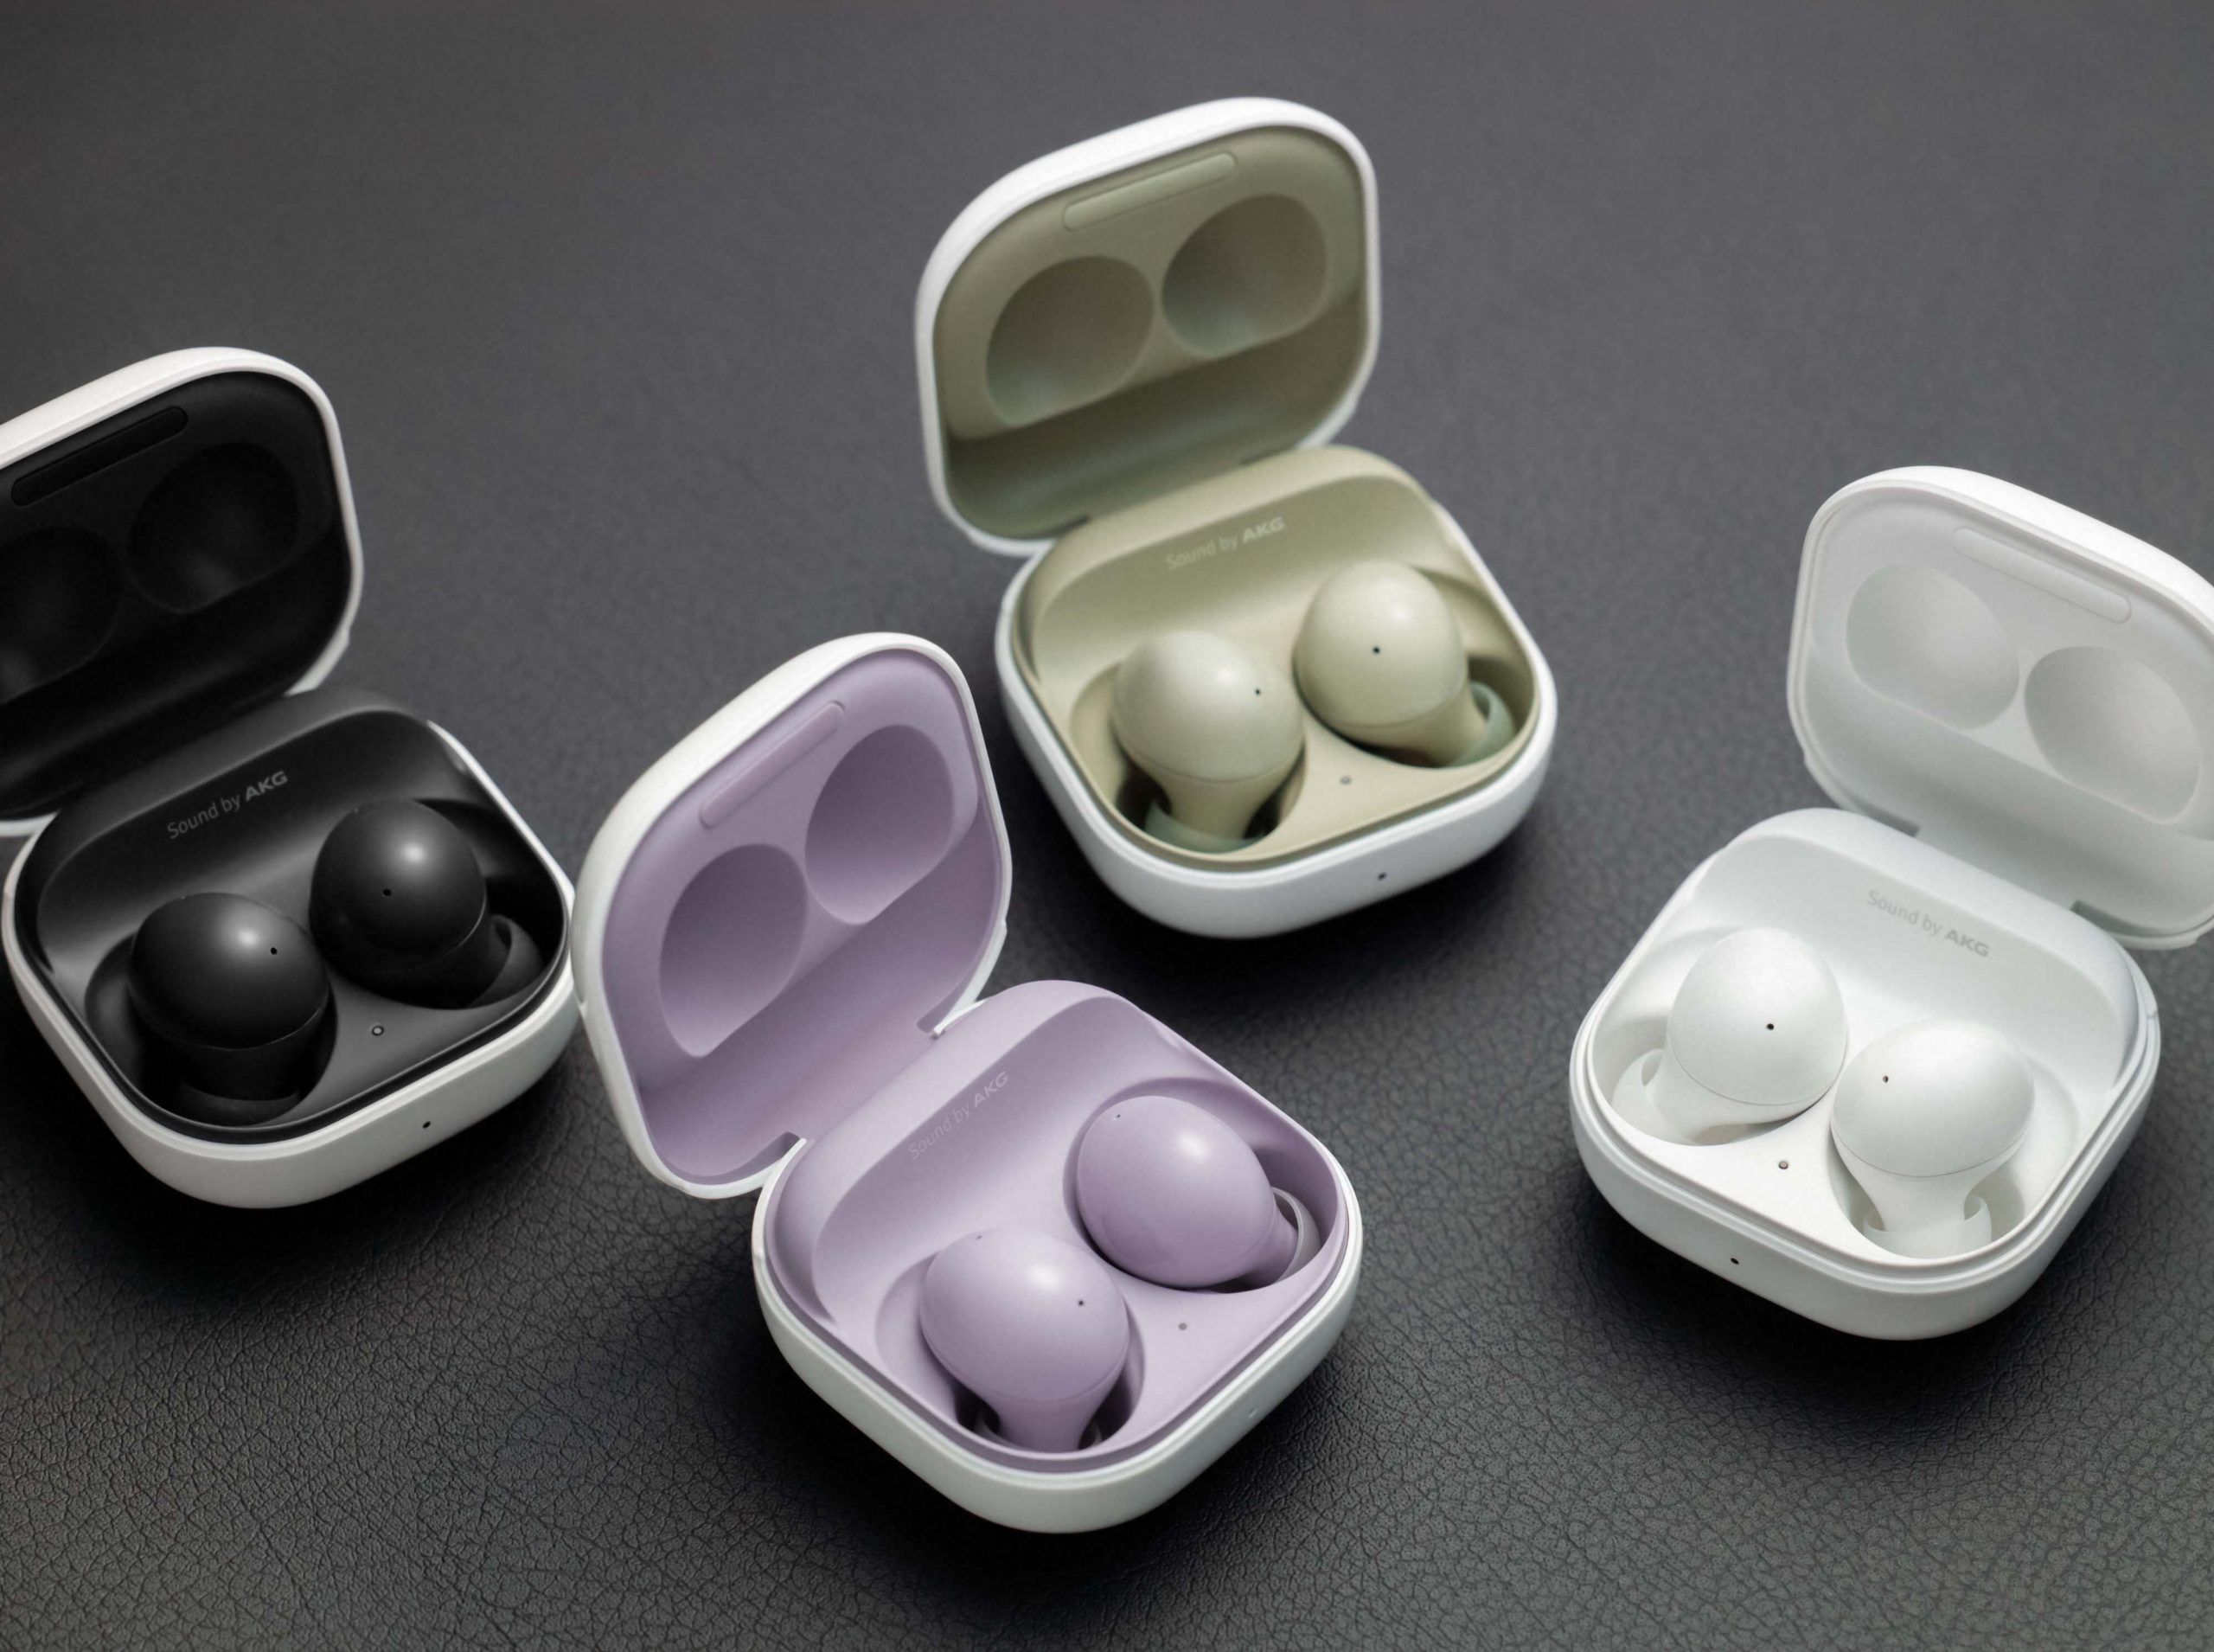 Samsung's new 150 earbuds have noise canceling and fun colors